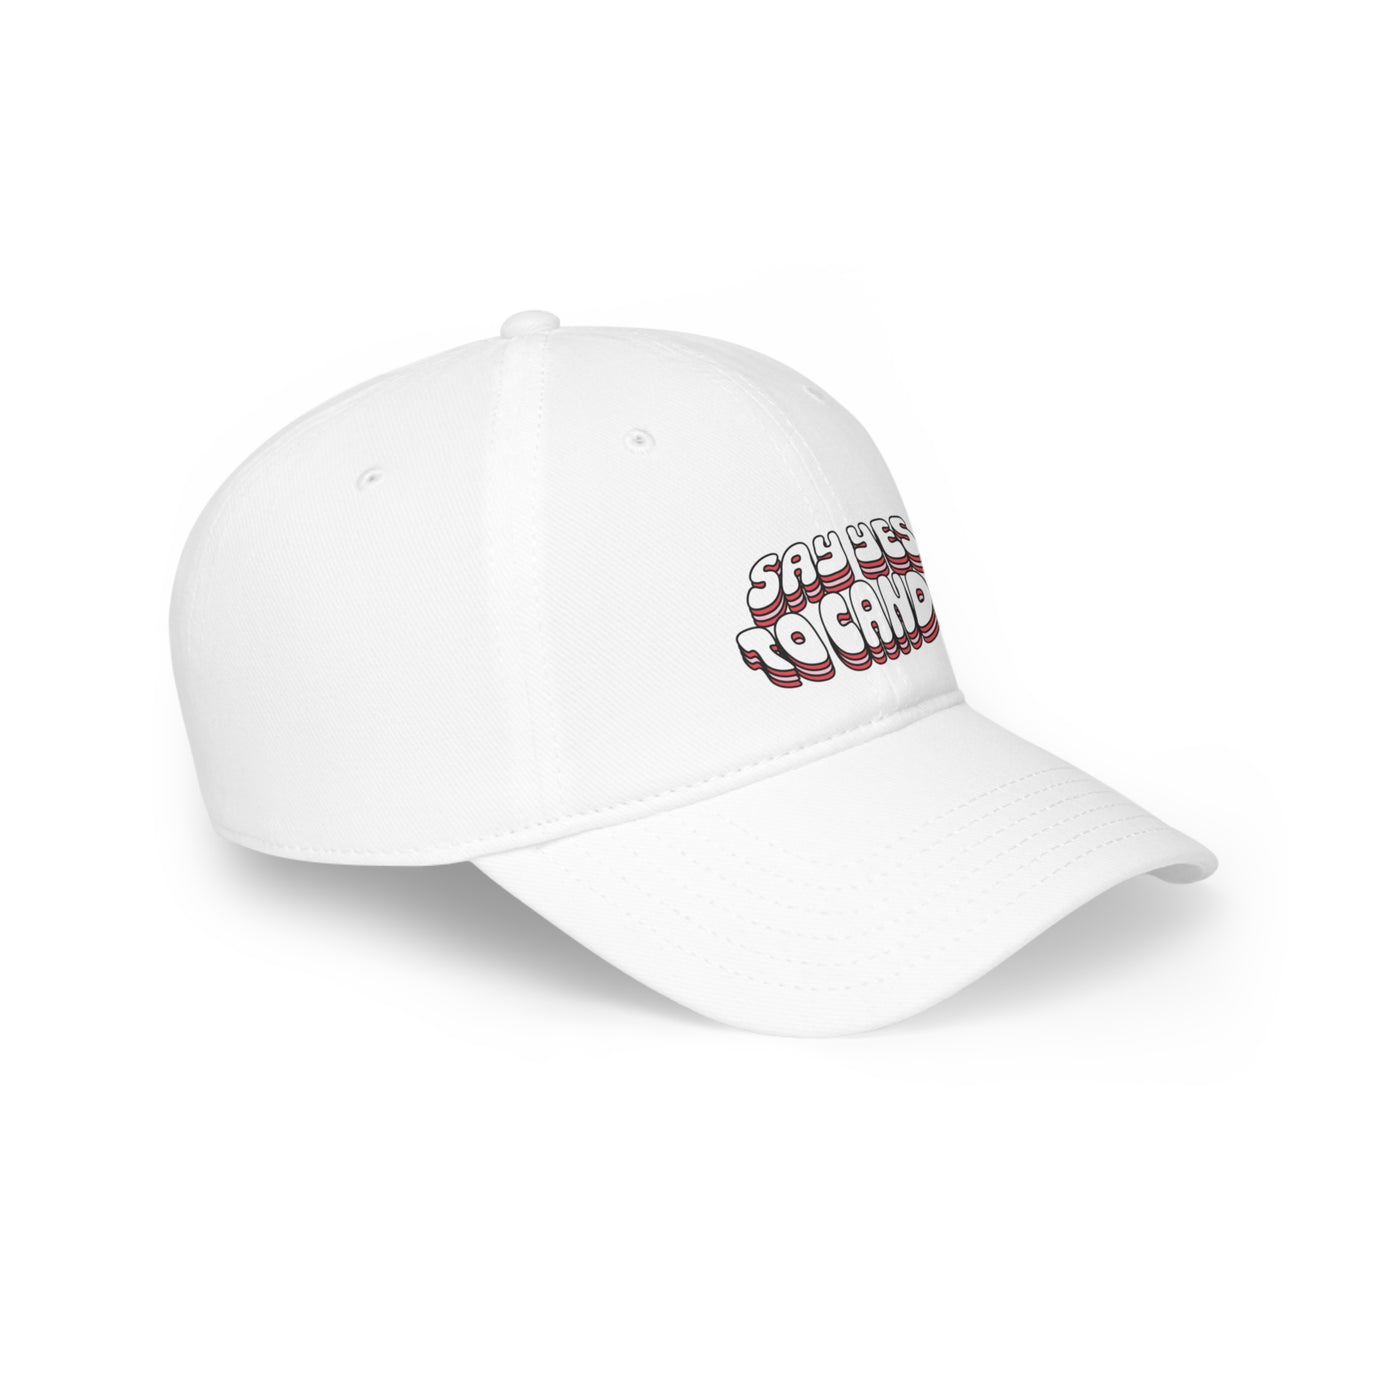 Say YES To Candy Baseball Cap - Limited Edition Valentines Day